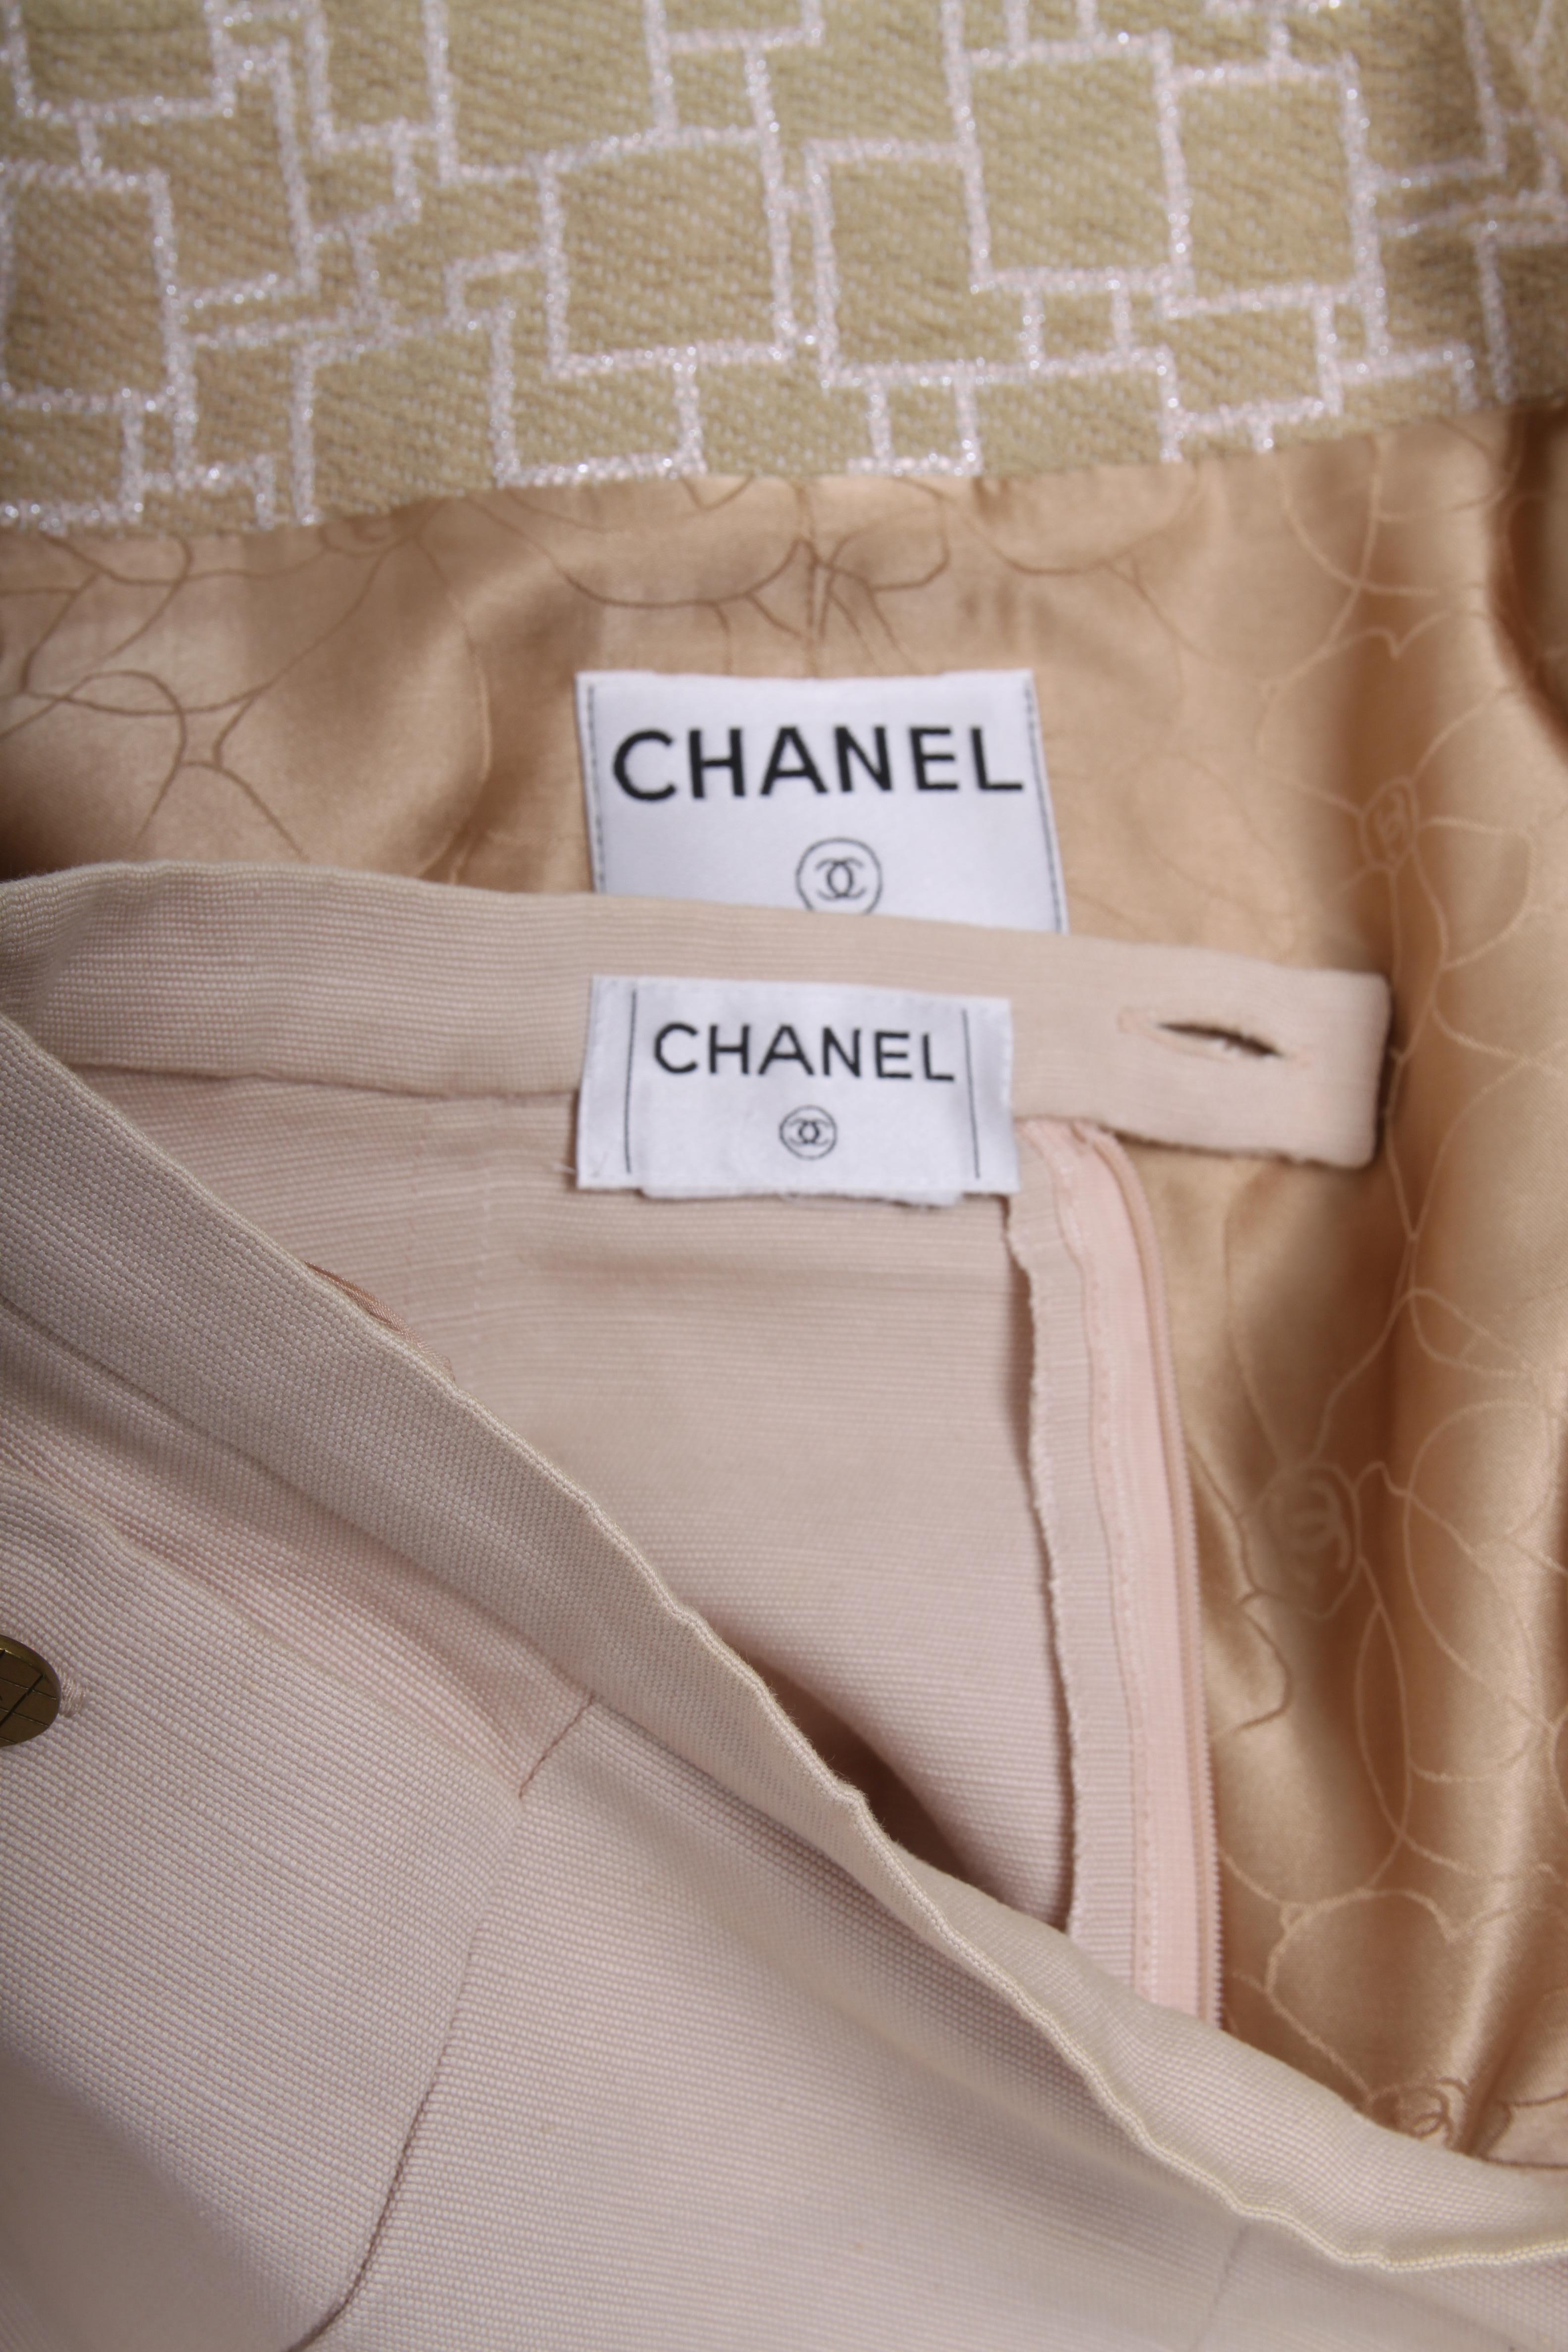 Not vintage yet... Two-piece beige Chanel suit from the Spring Collection of 2001.

The bouclé bodywarmer has front closure with a zipper and epaullettes on the shoulders with a matte silver button embellished with CC logo. The beige bouclé has a